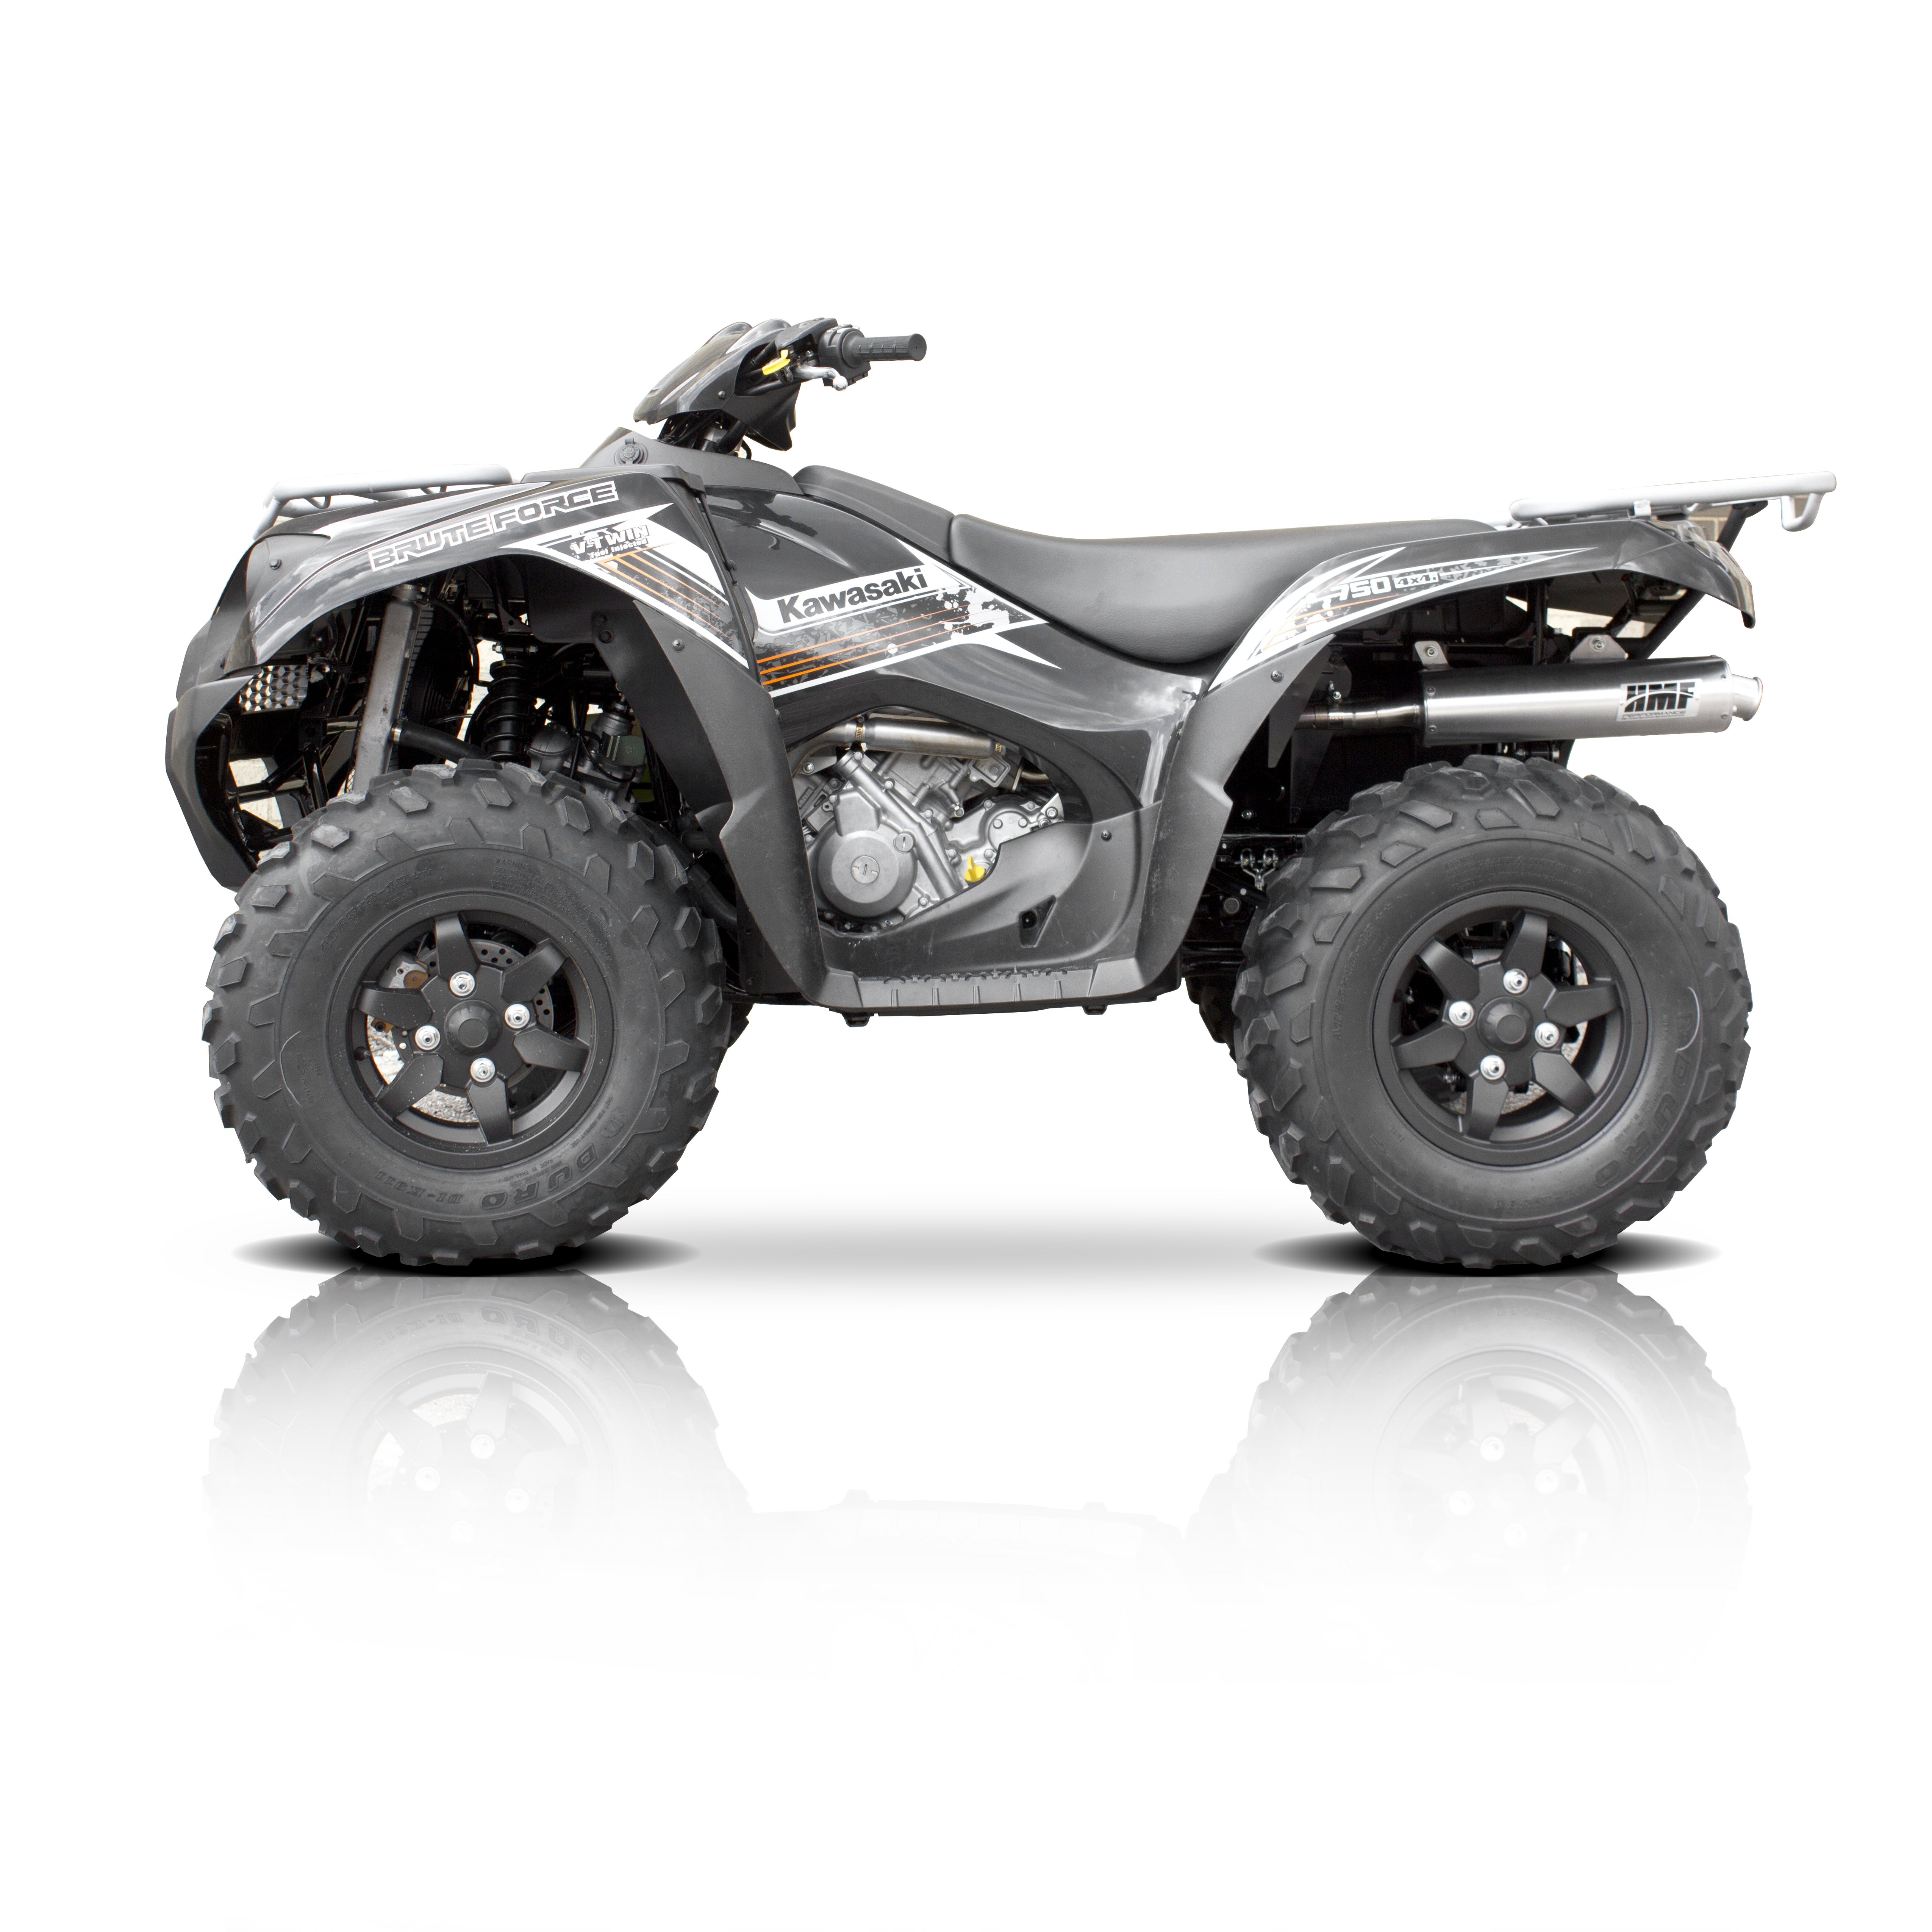 More information about "HMF Press Release | 2012 Kawasaki Brute Force"